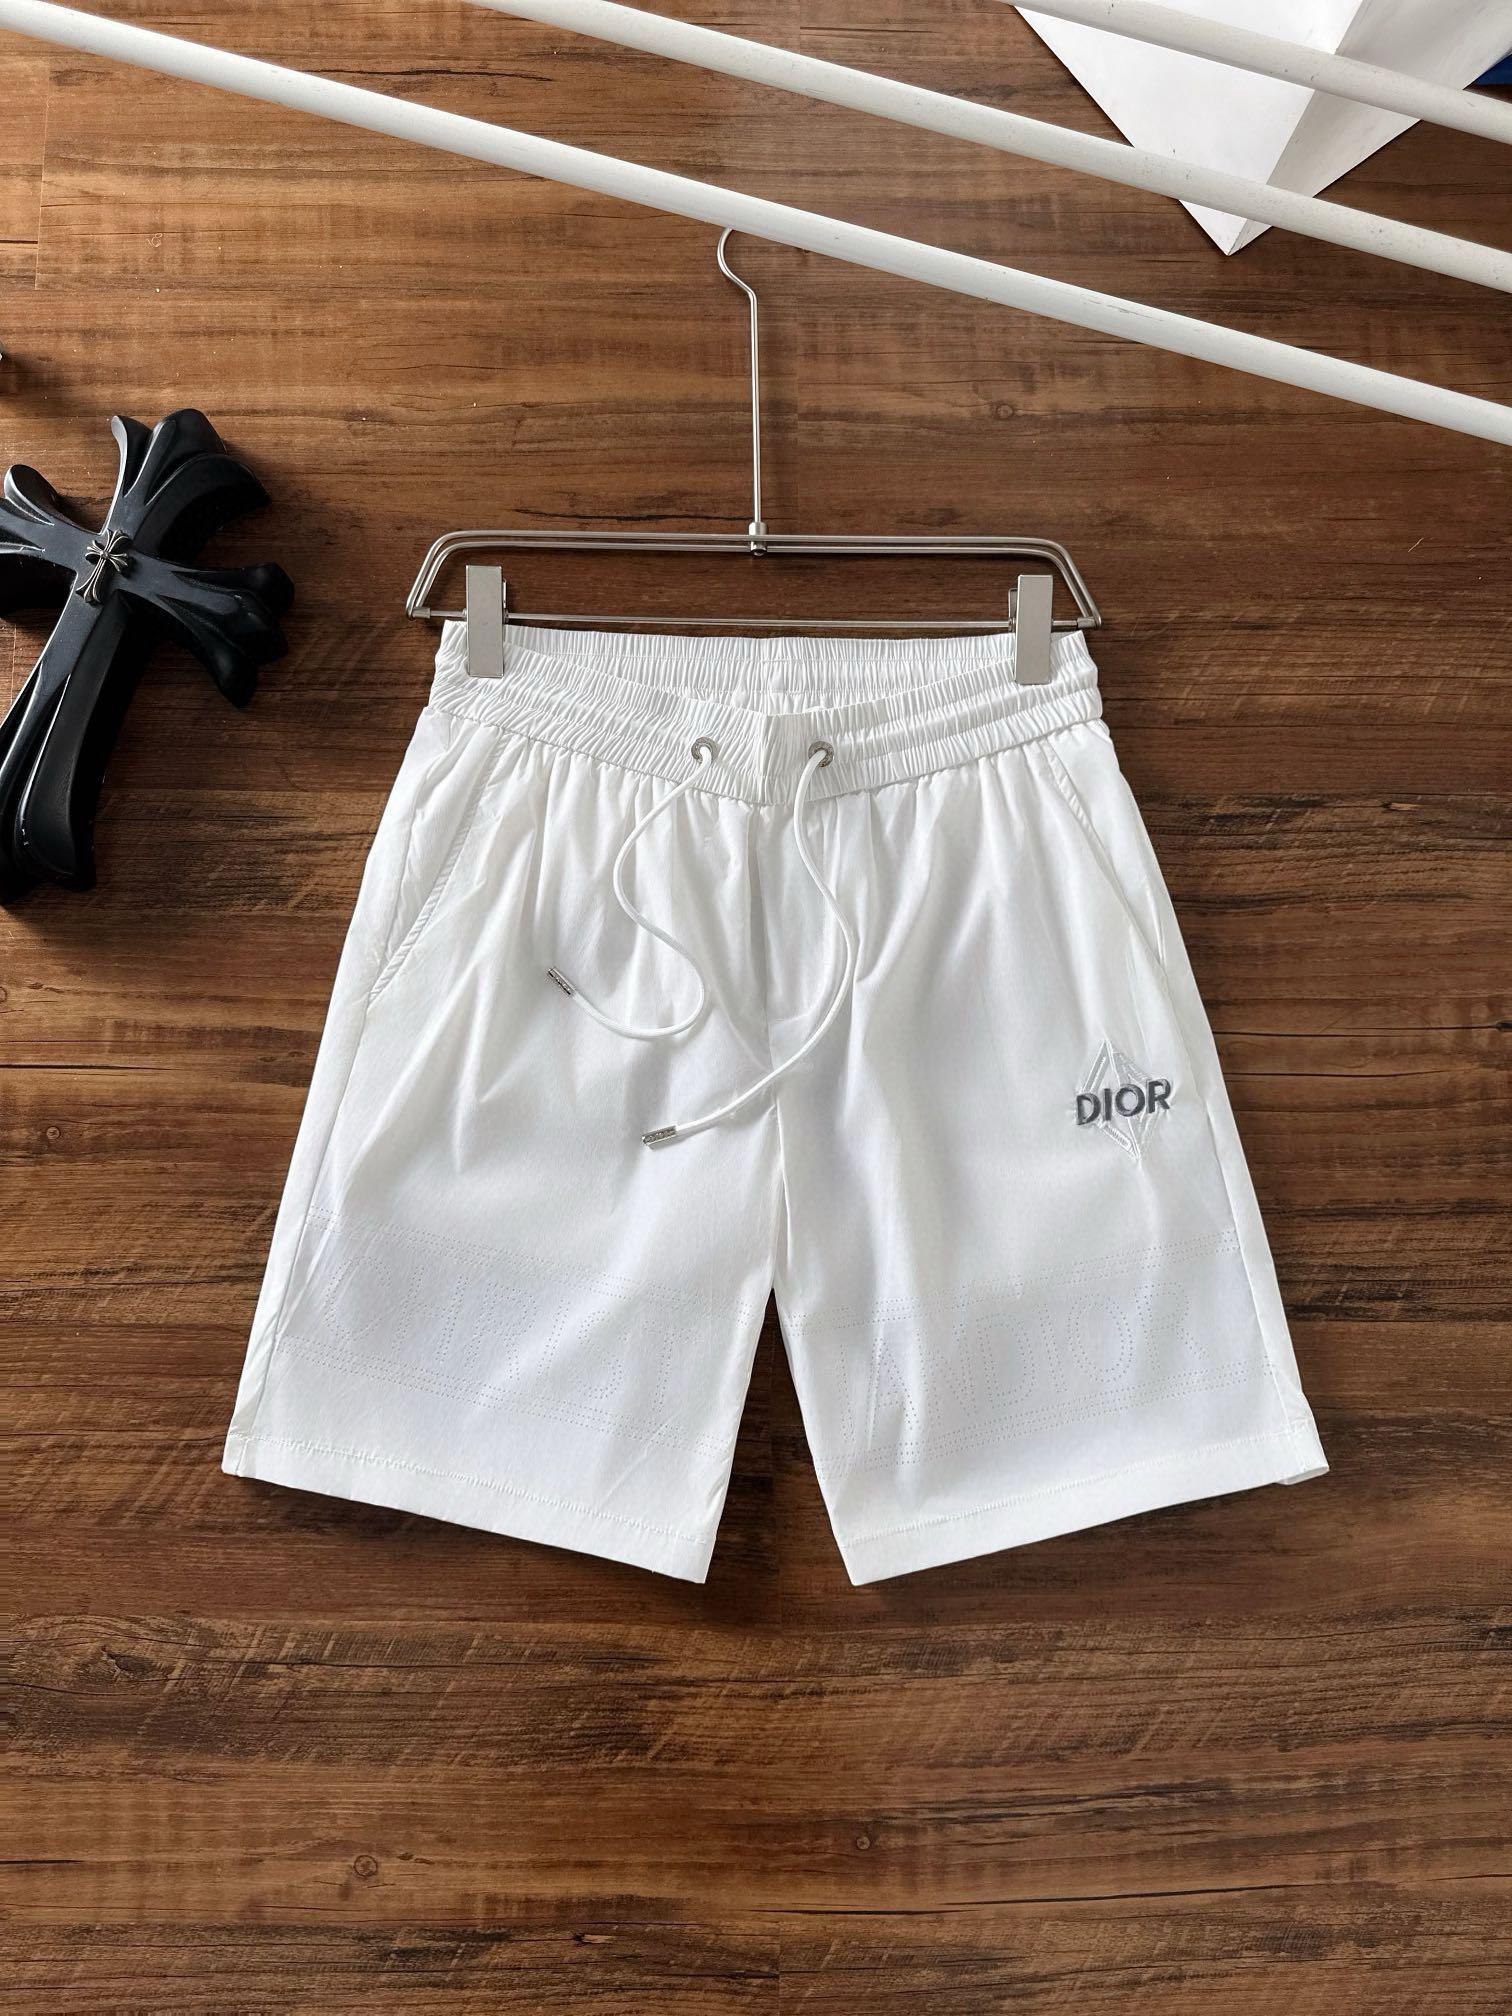 Dior Clothing Pants & Trousers Shorts Spring/Summer Collection Fashion Casual